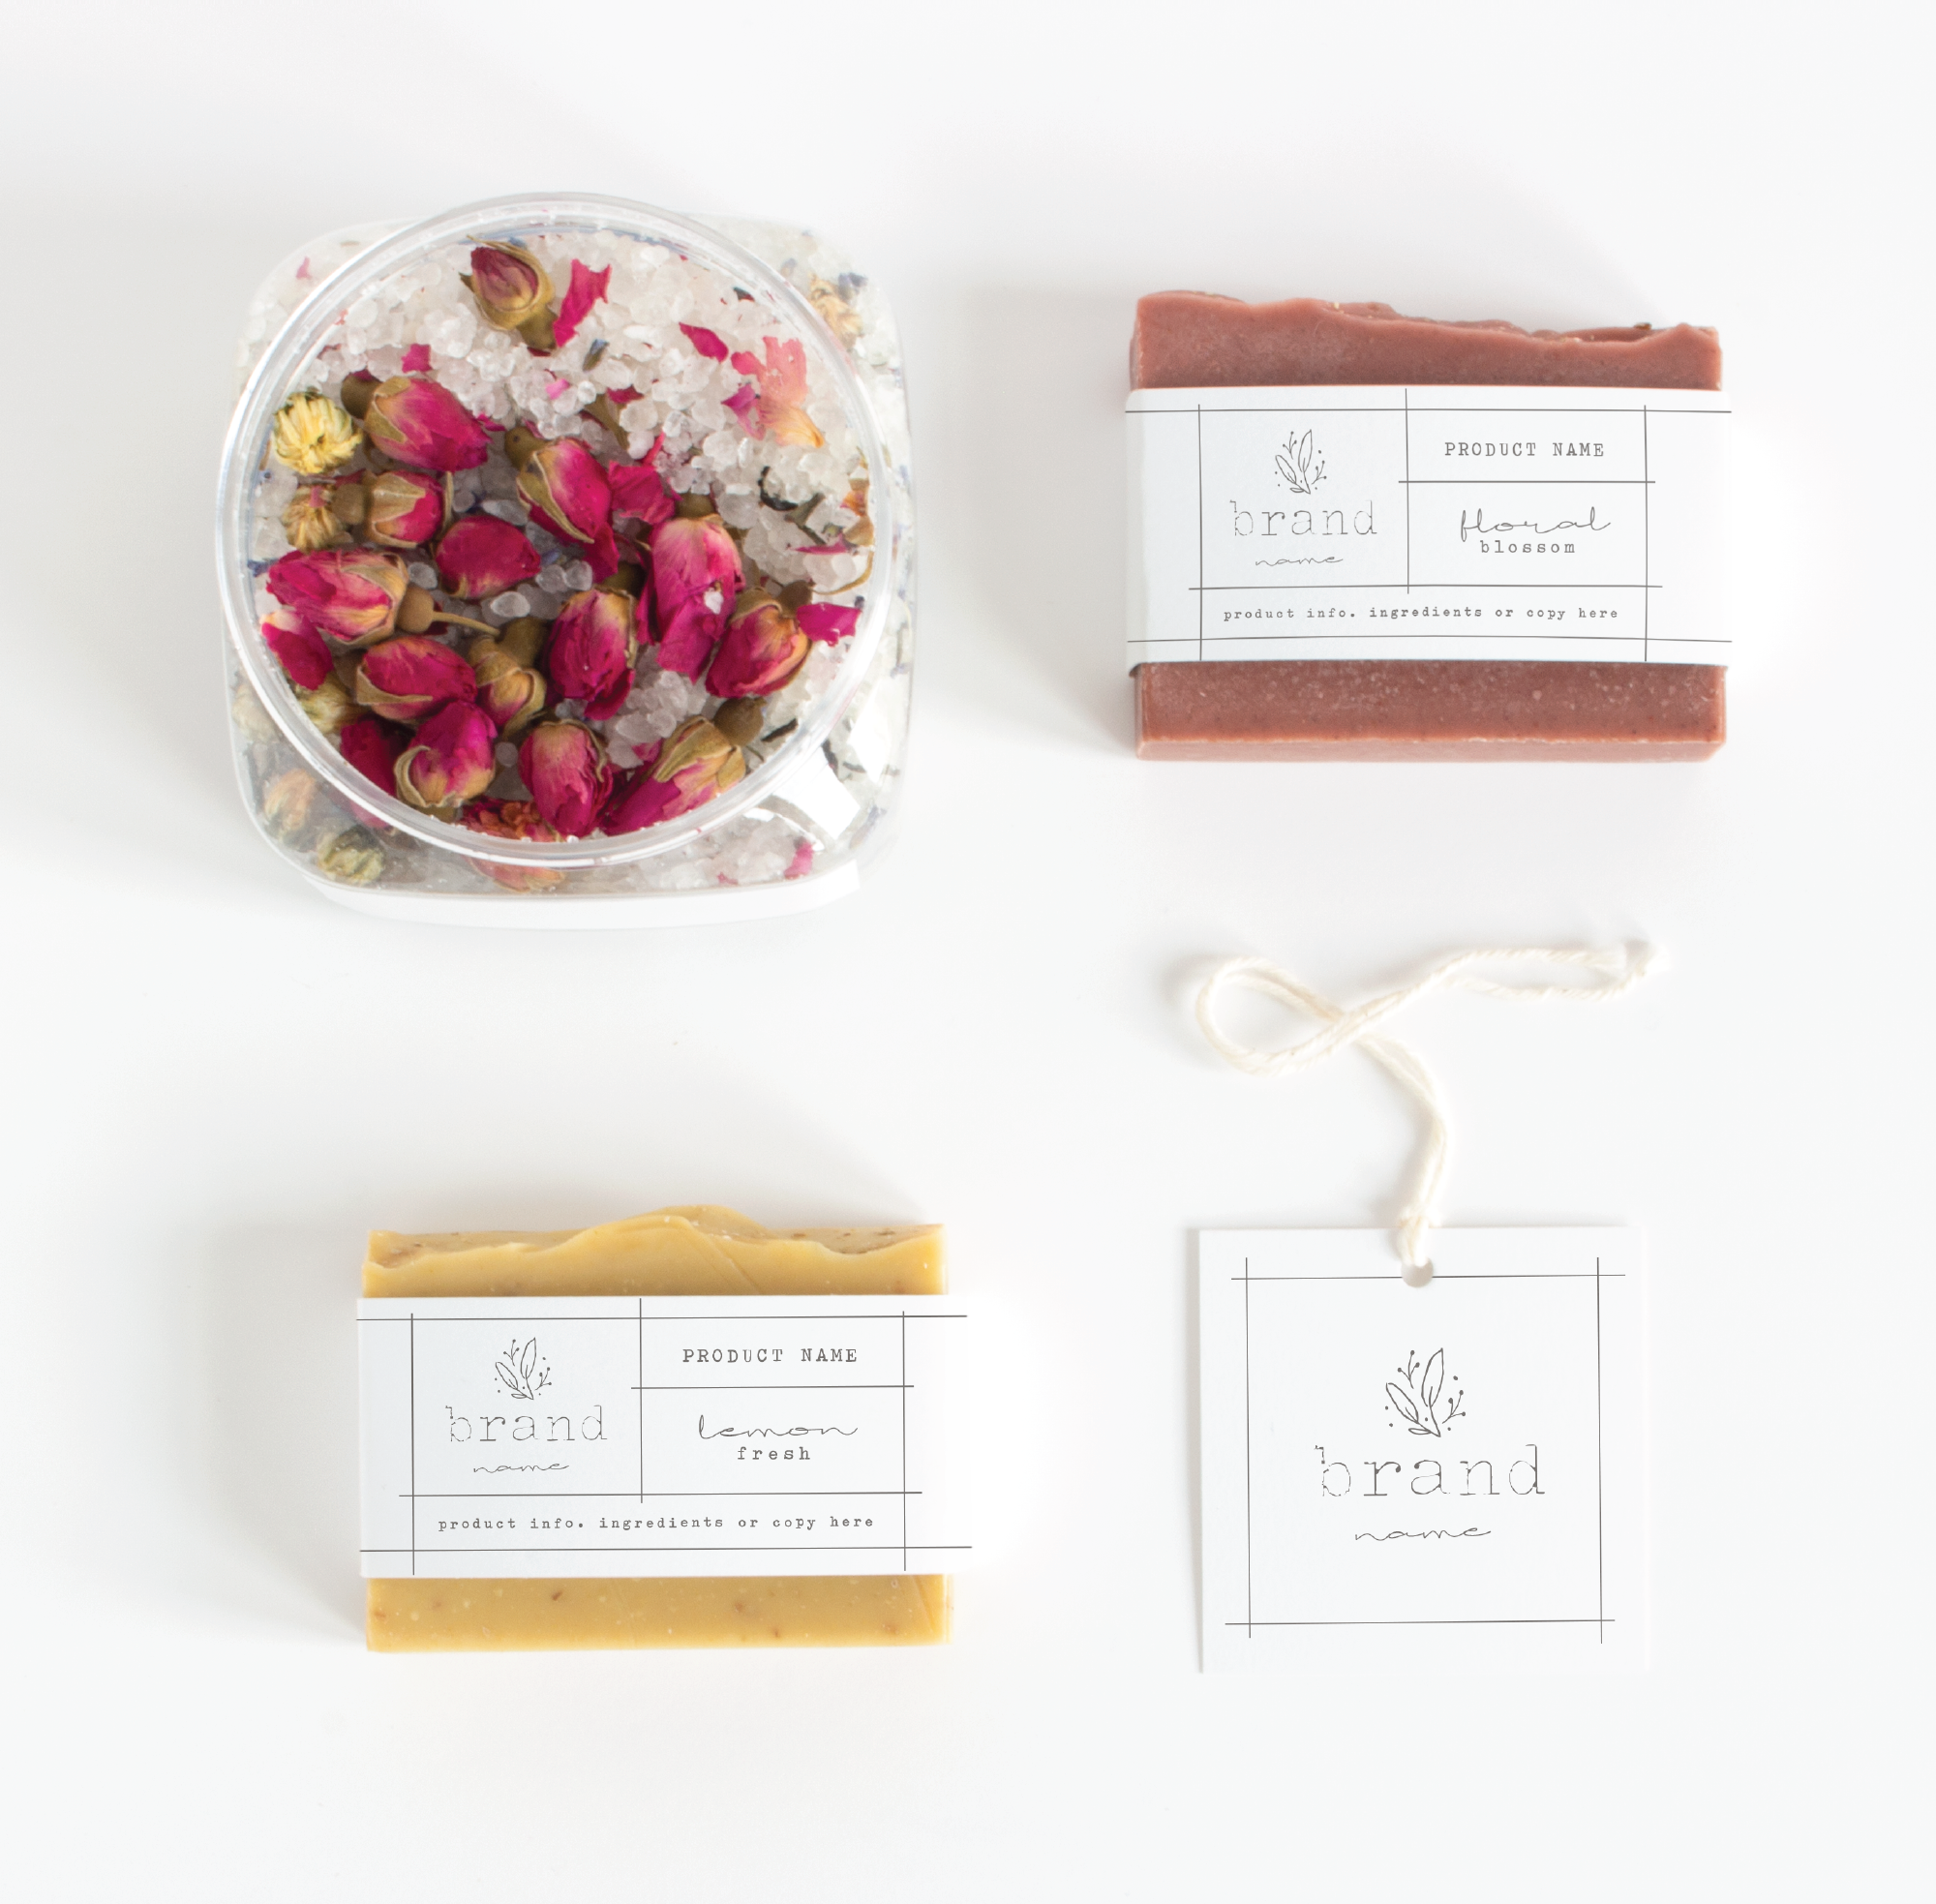 Harlow Street Square Product Label